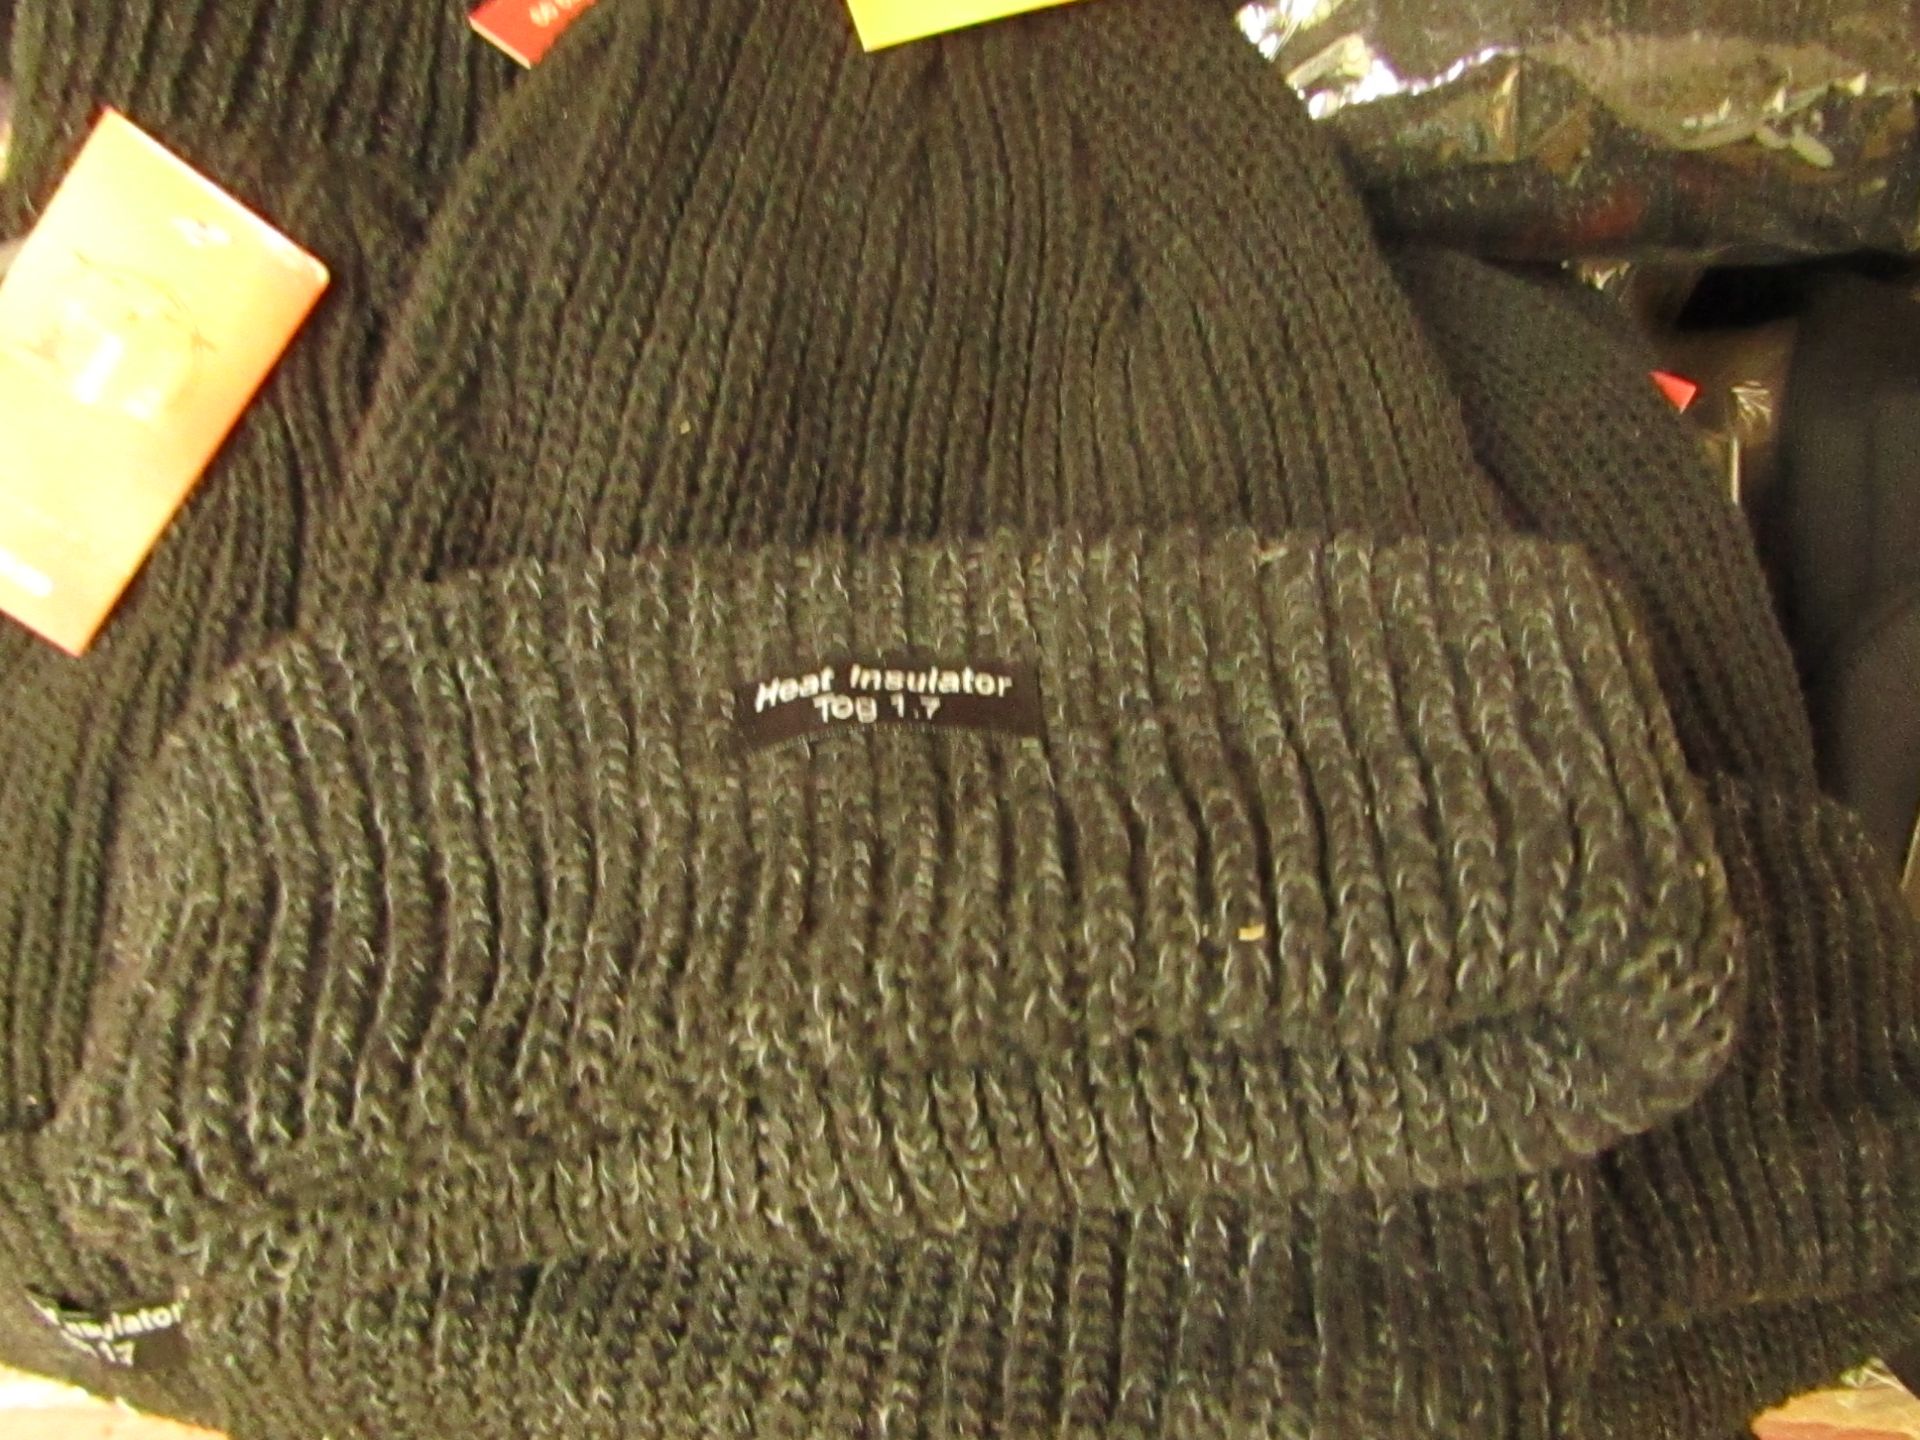 5 X Chunky Knit Fleece Lined Heat Insulate Tog 1.7 Hats RRP £9.99 each all new with tags